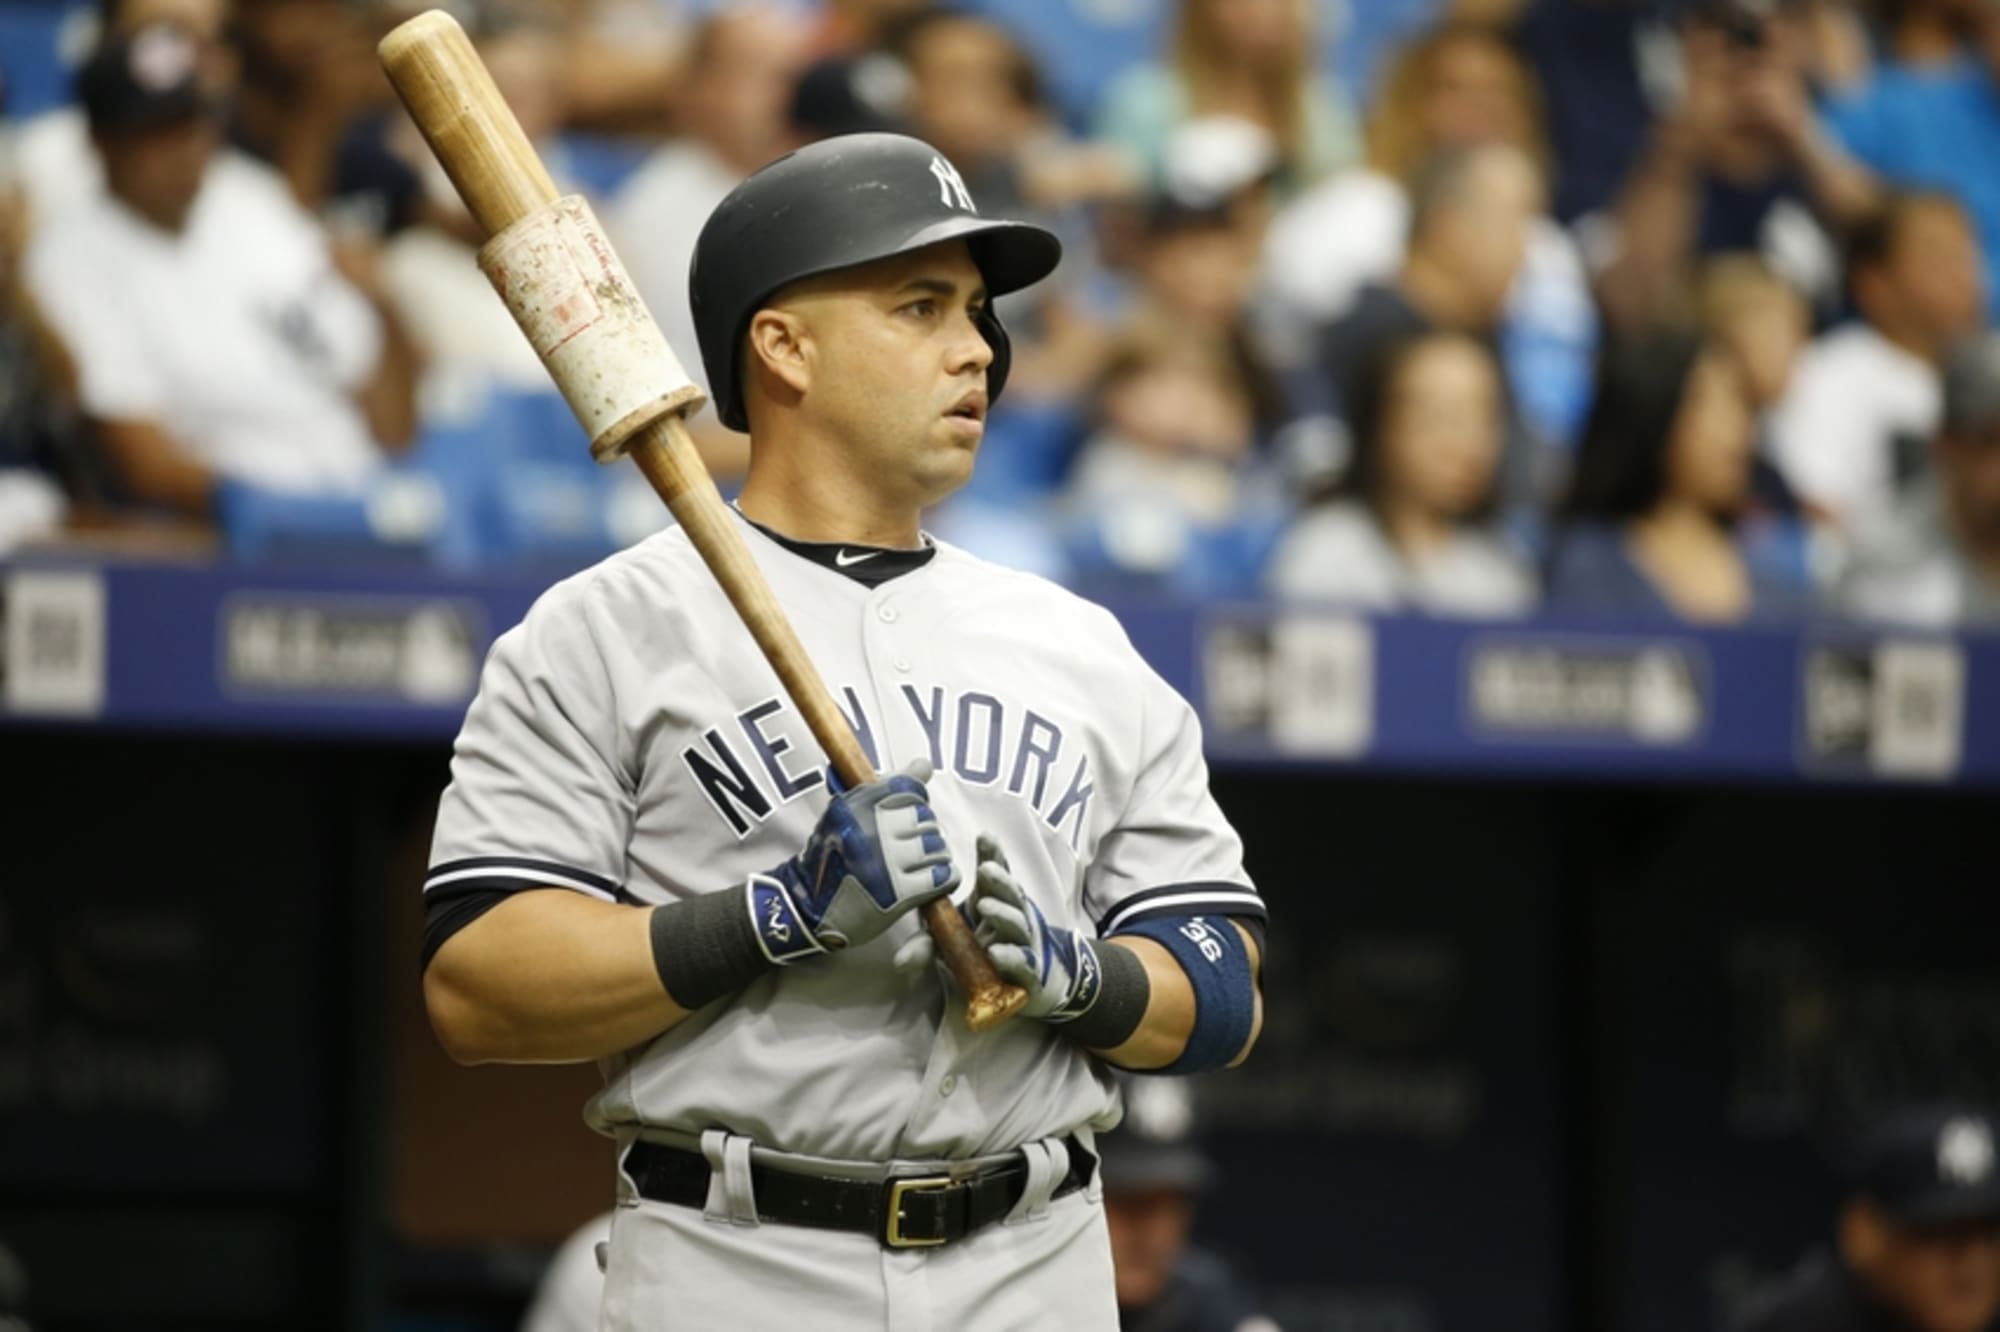 For the Yankees, Carlos Beltran would be more of the same